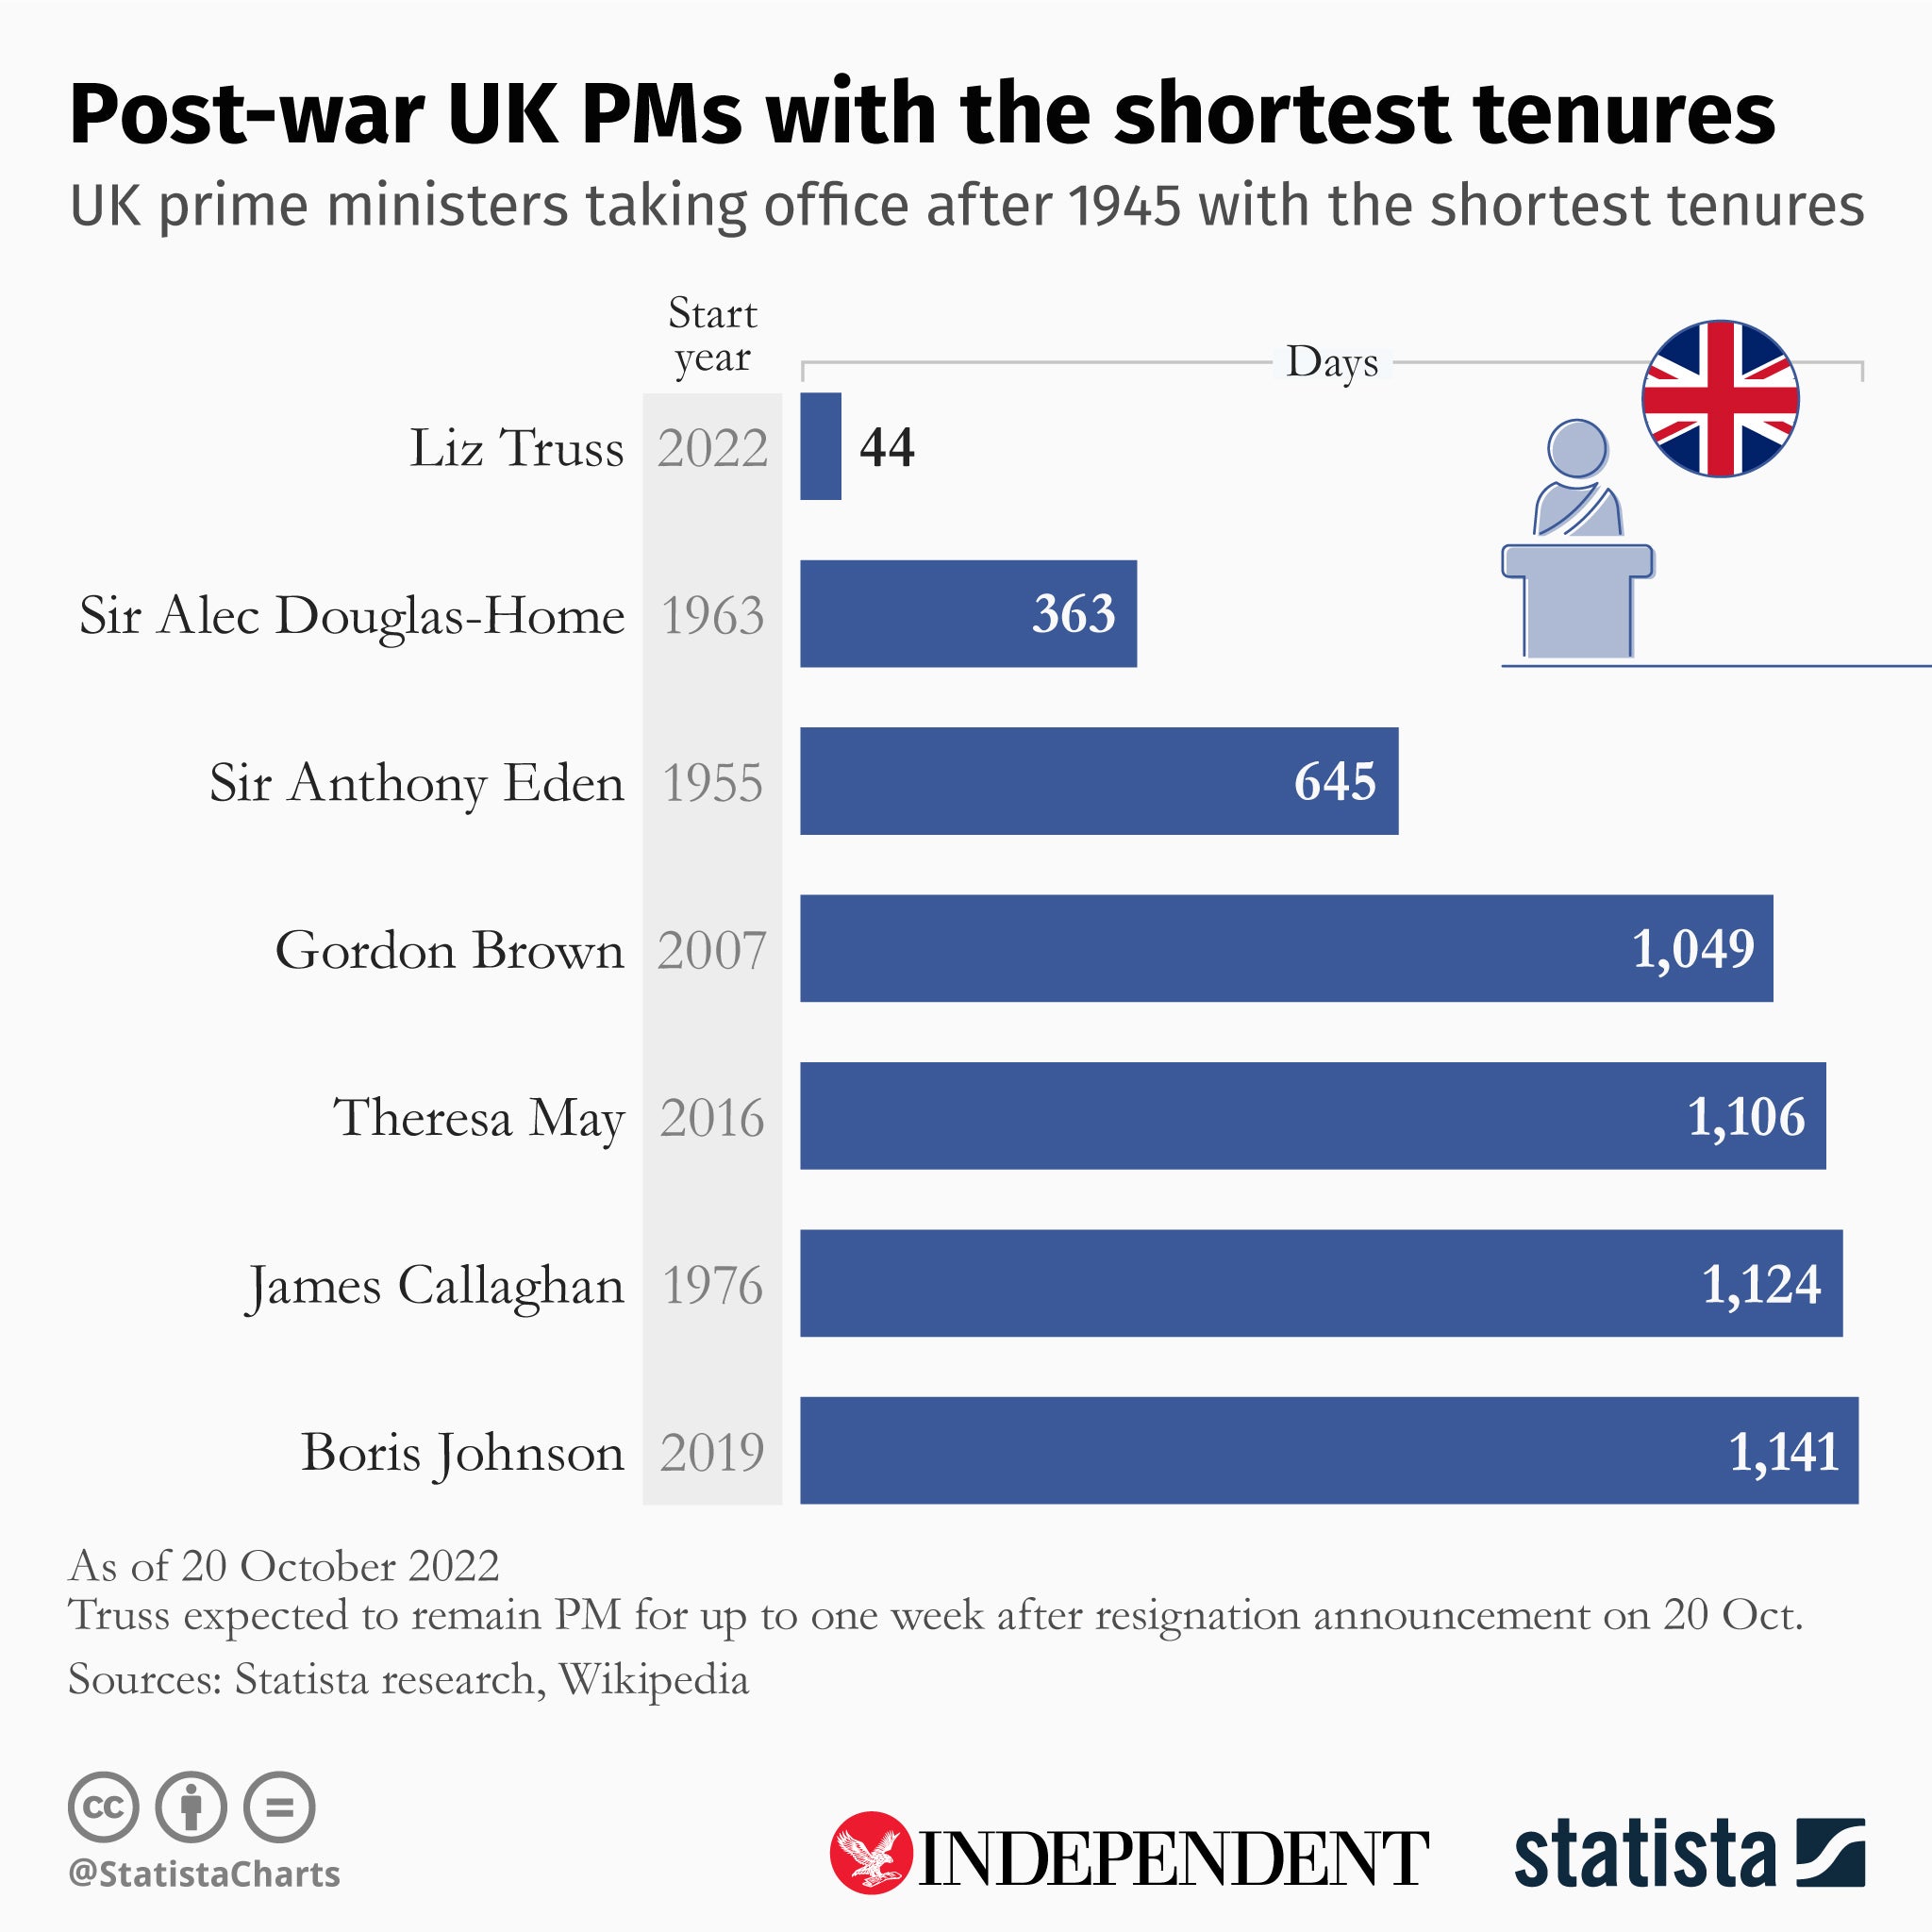 This chart created by Statista for The Independent shows the UK’s shortest-serving prime ministers